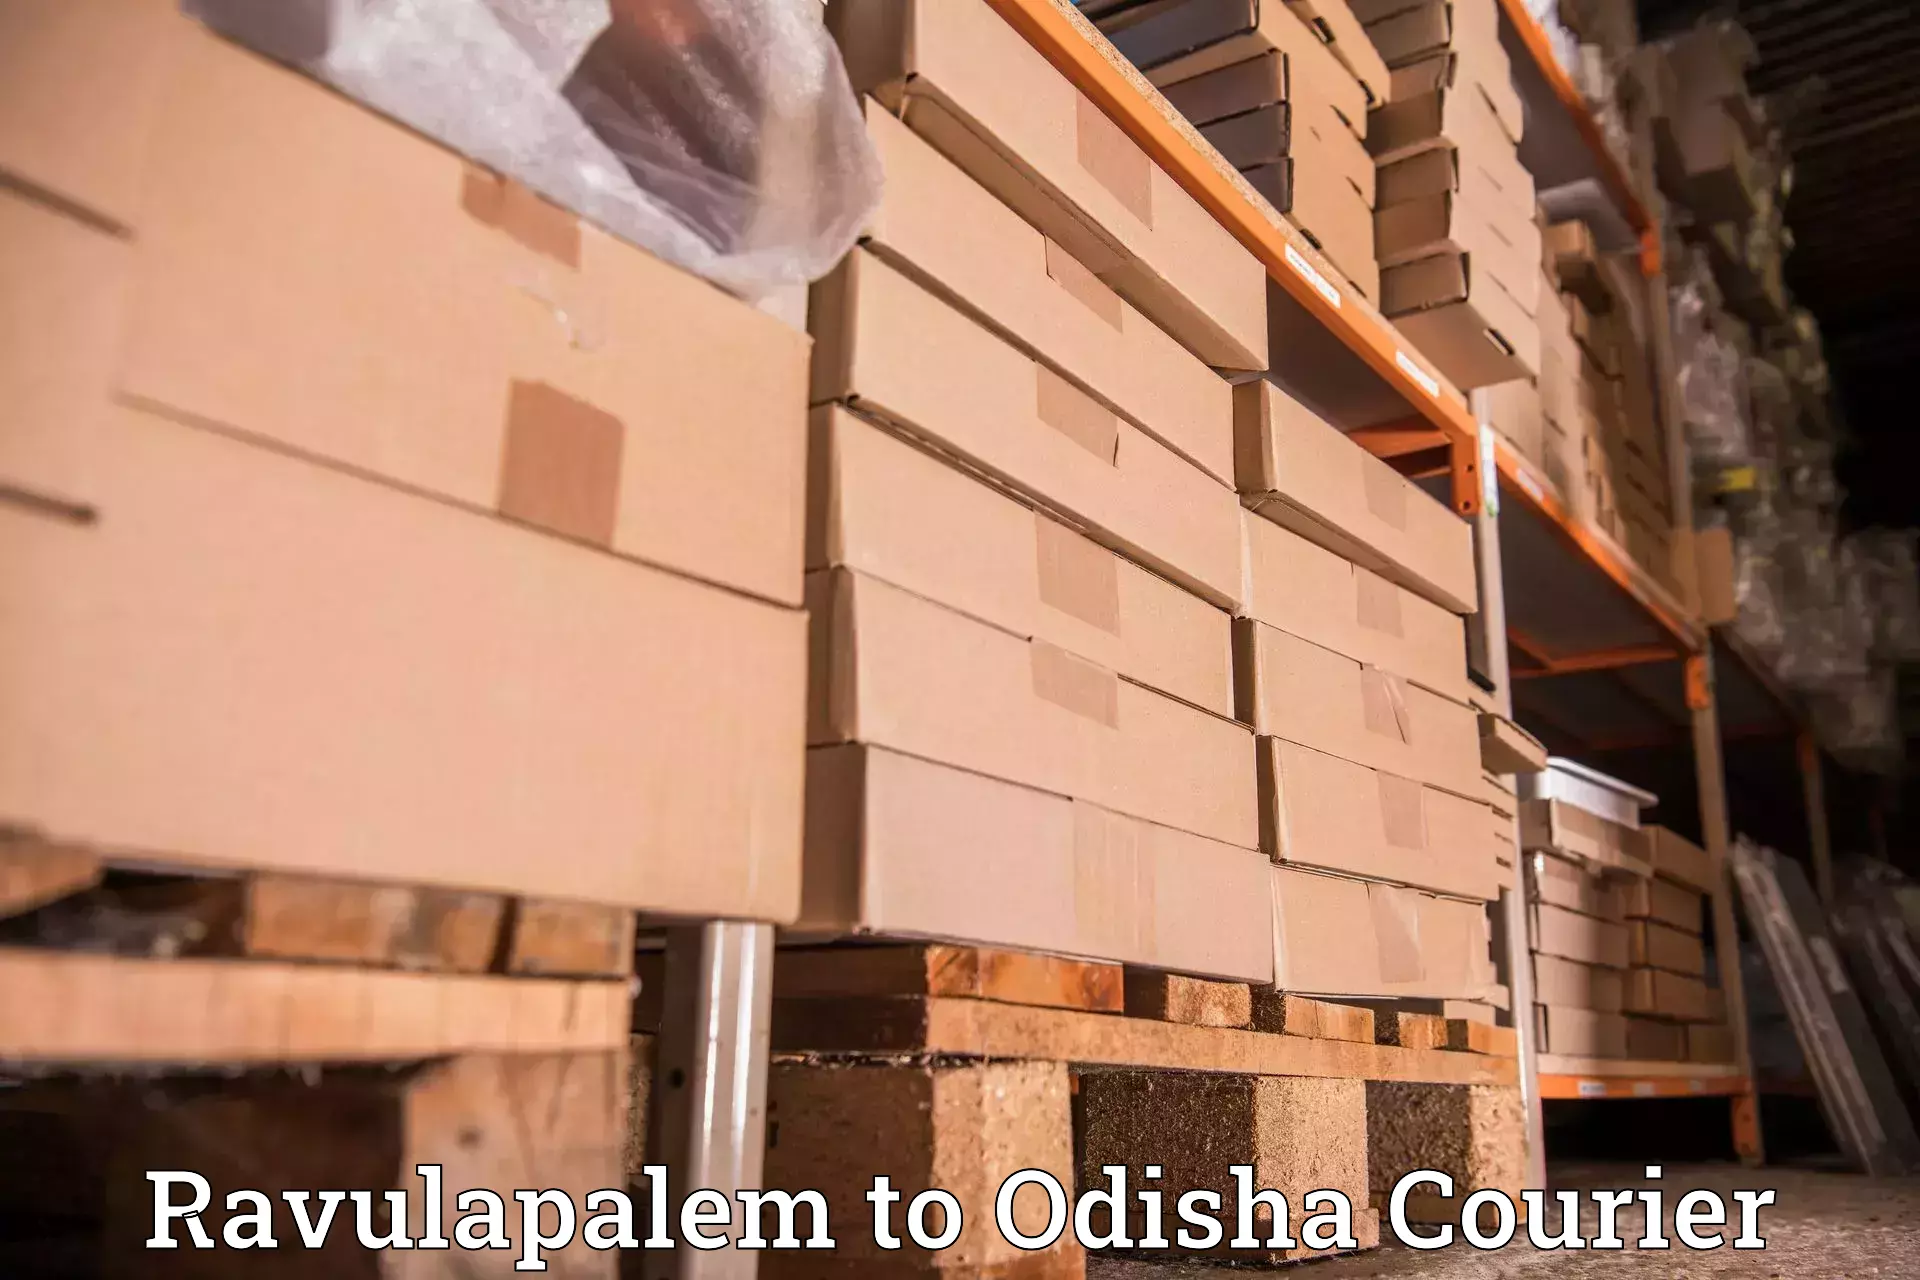 Customer-oriented courier services in Ravulapalem to Kesinga